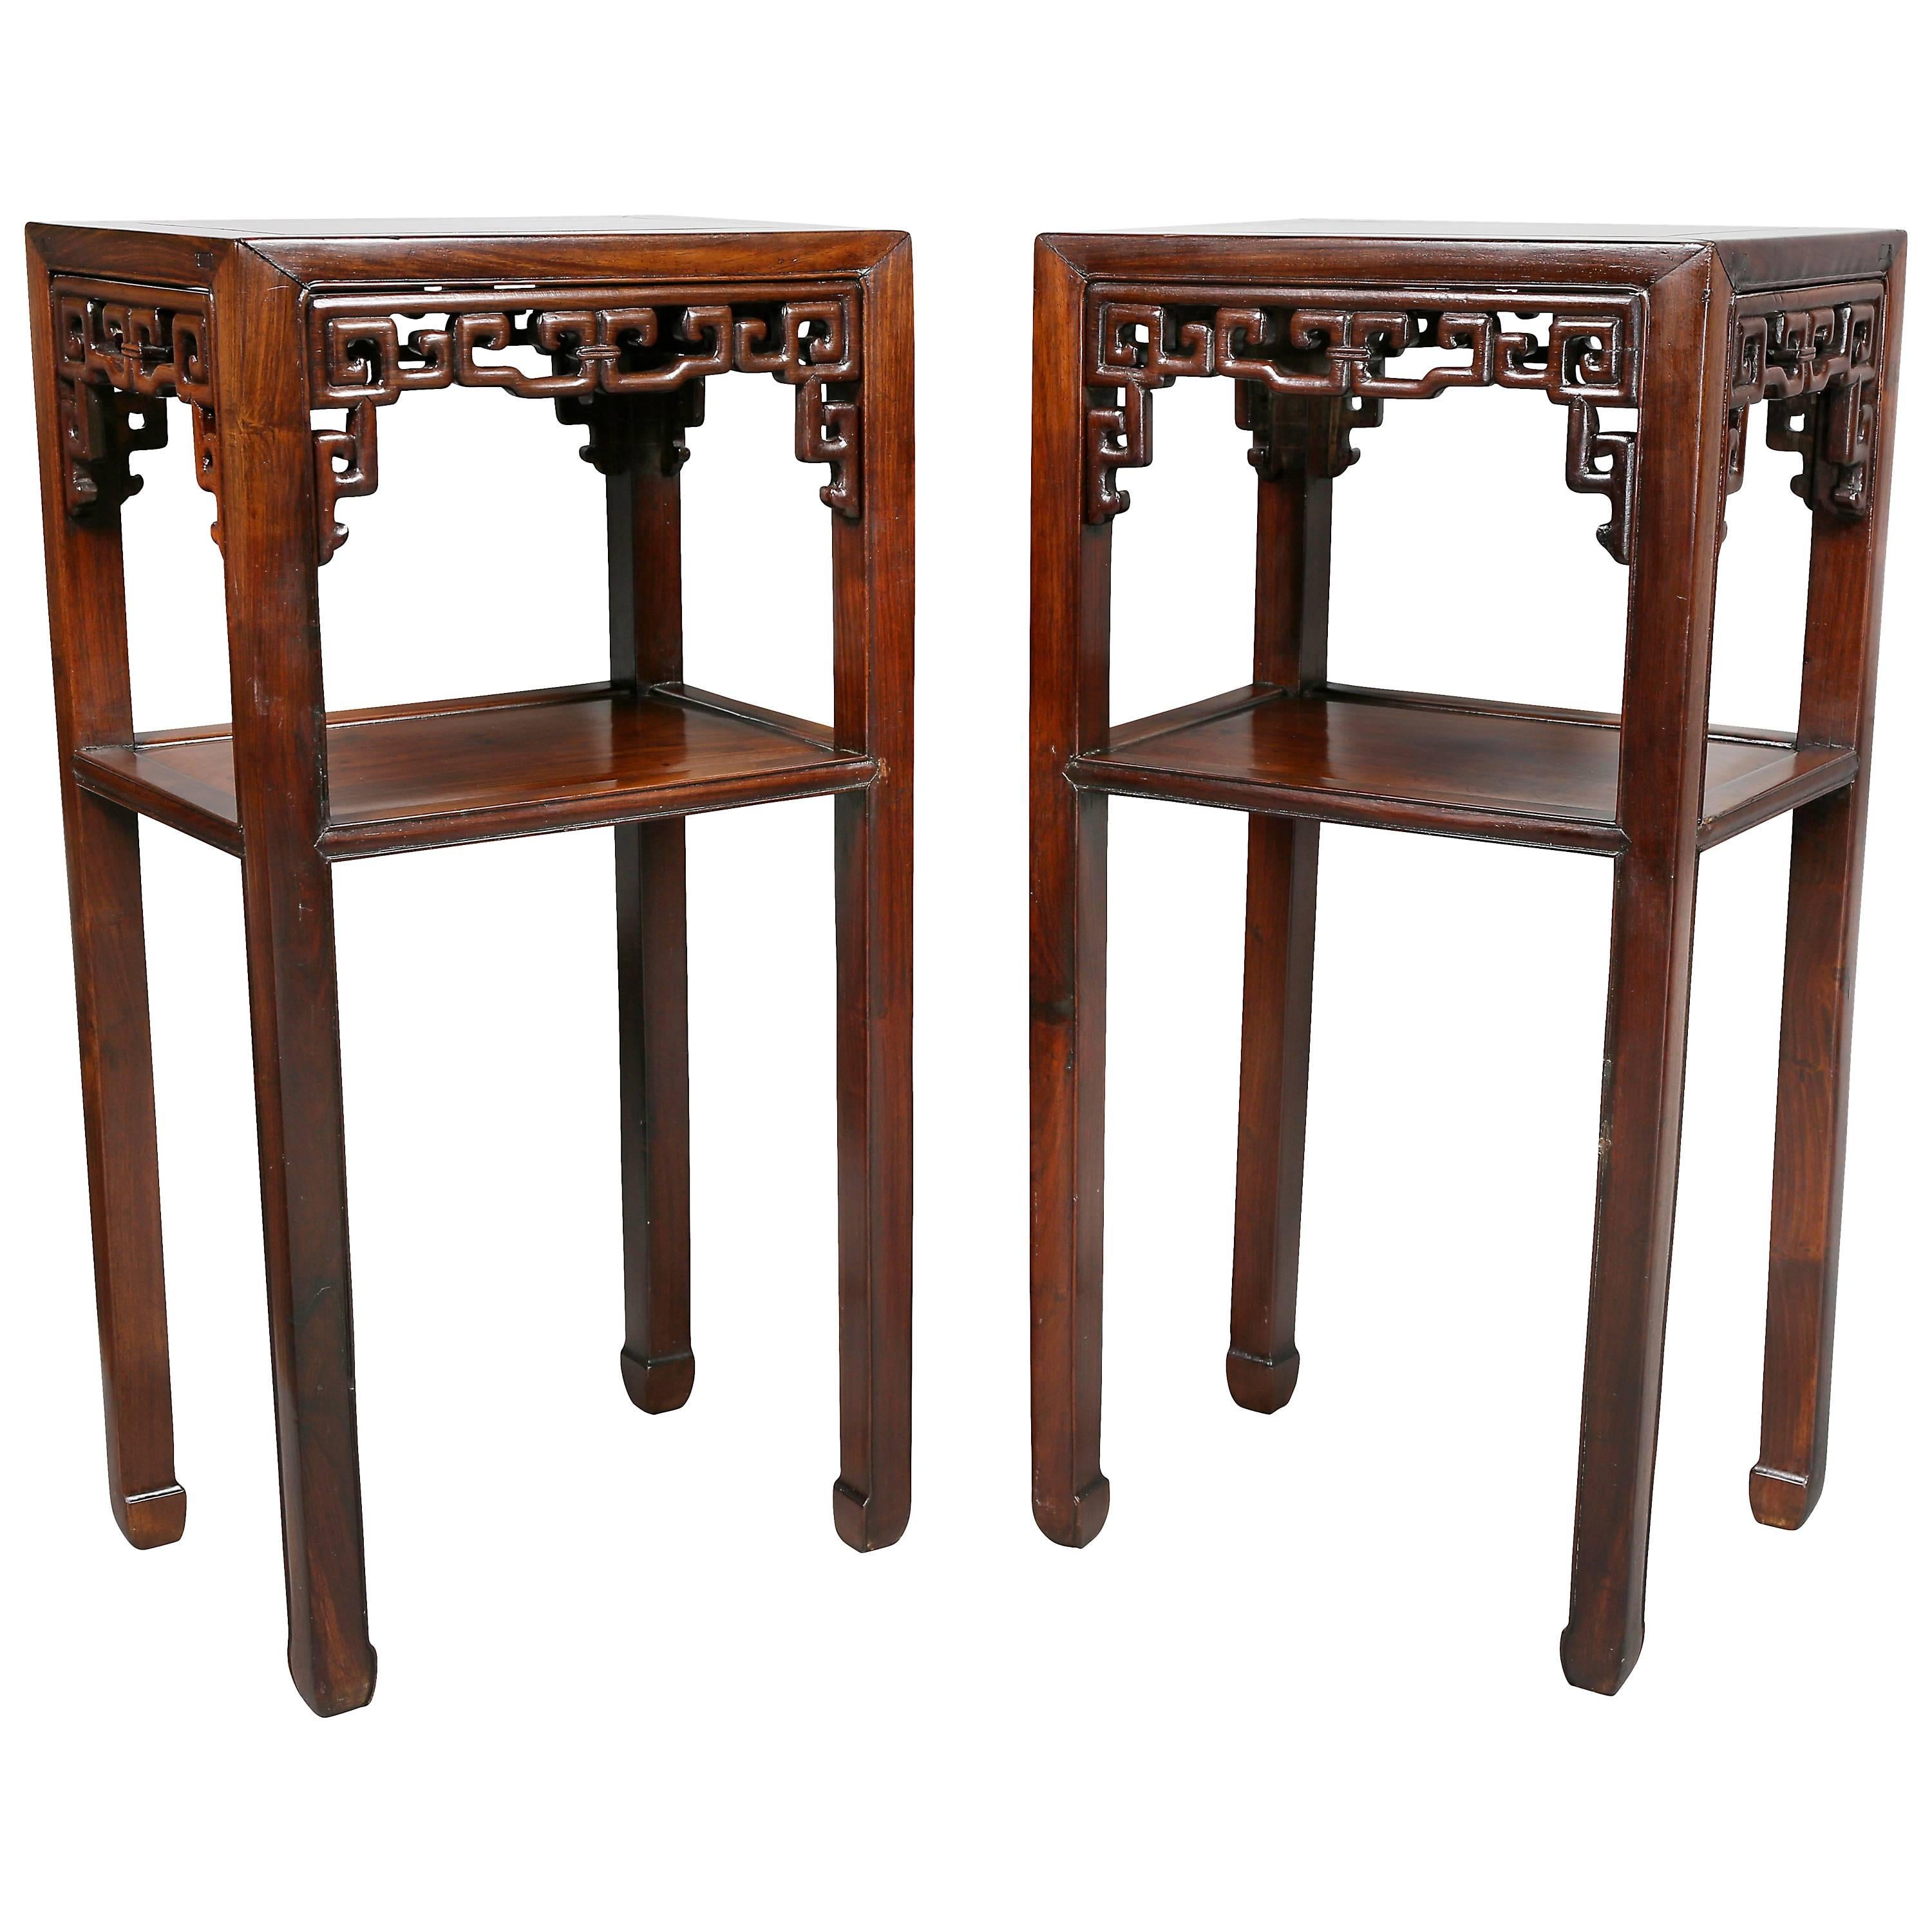 Pair of Chinese Hardwood Tall Tables